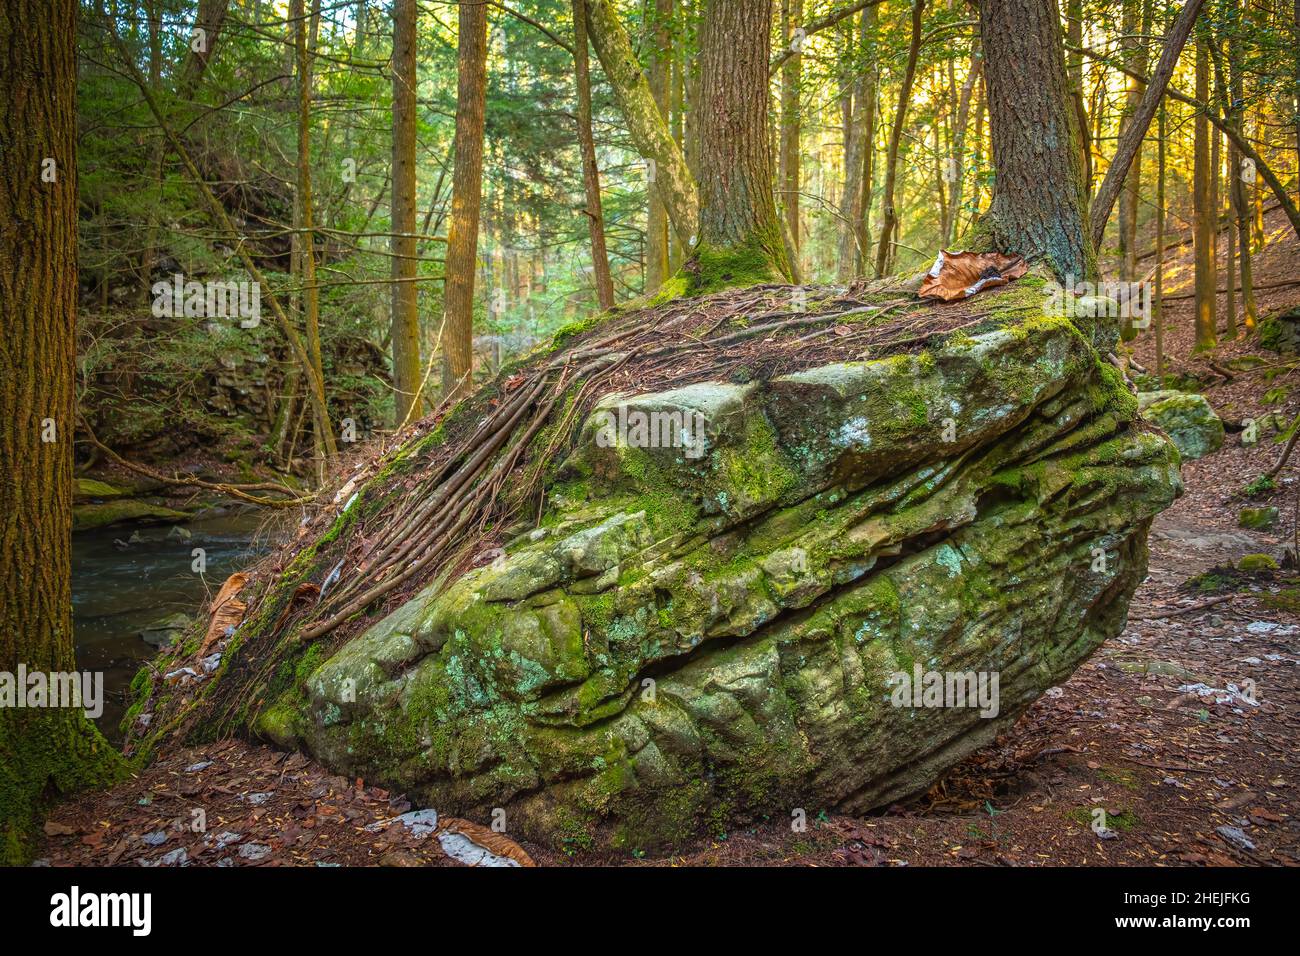 Hemlock trees grow on top of a boulder along the Fiery Gizzard Trail on the South Cumberland Plateau in Tennessee. Stock Photo